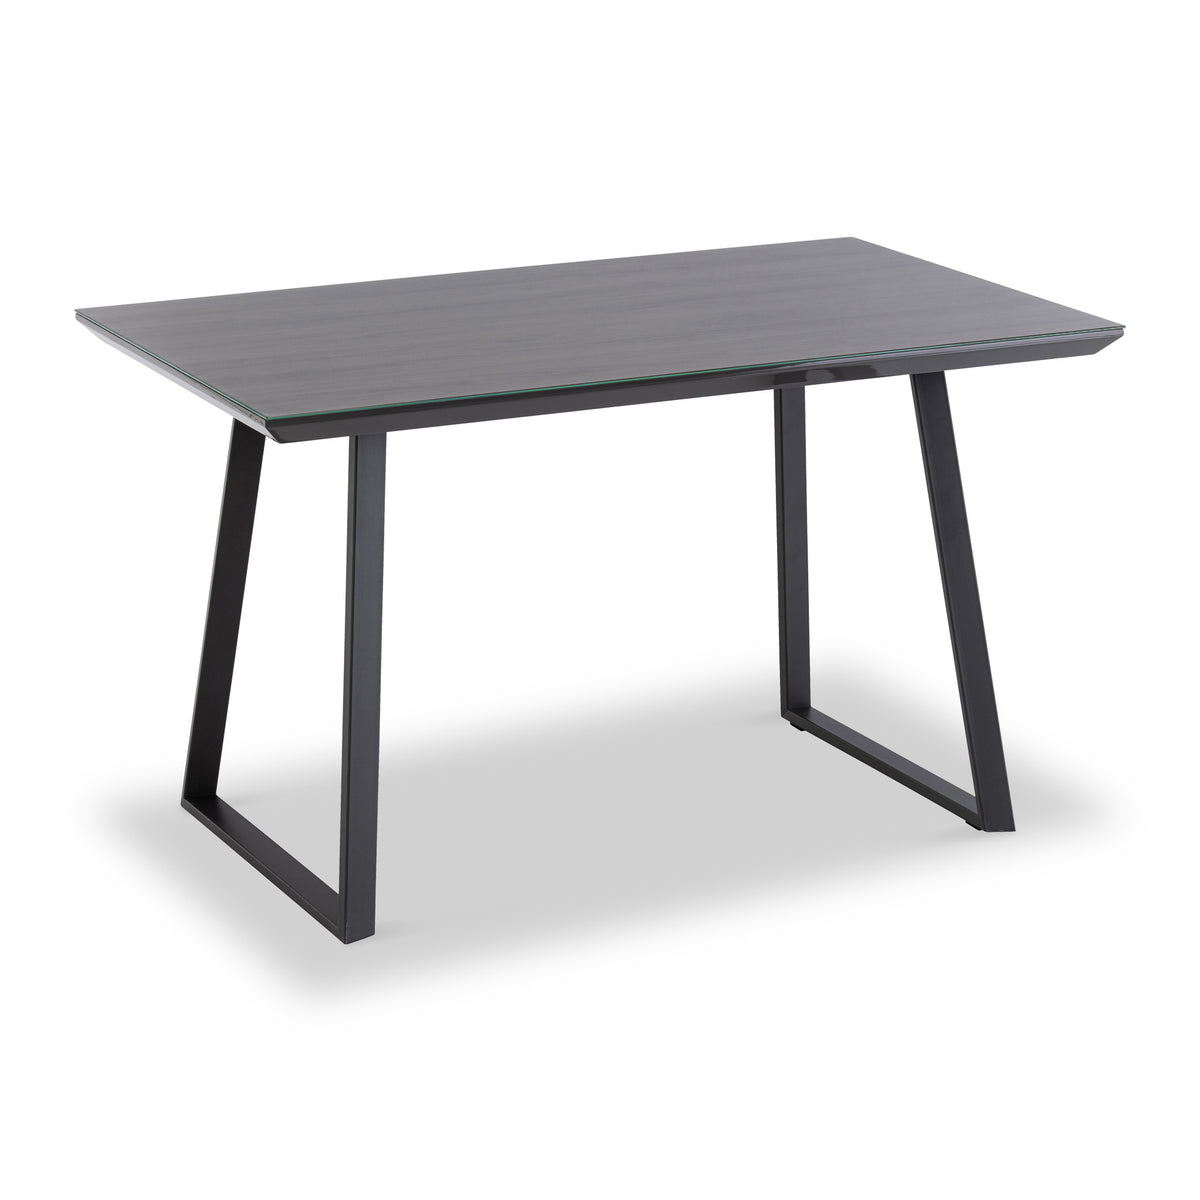 Virgo Grey Oak with Glass Top 120cm Dining Table from Roseland Furniture